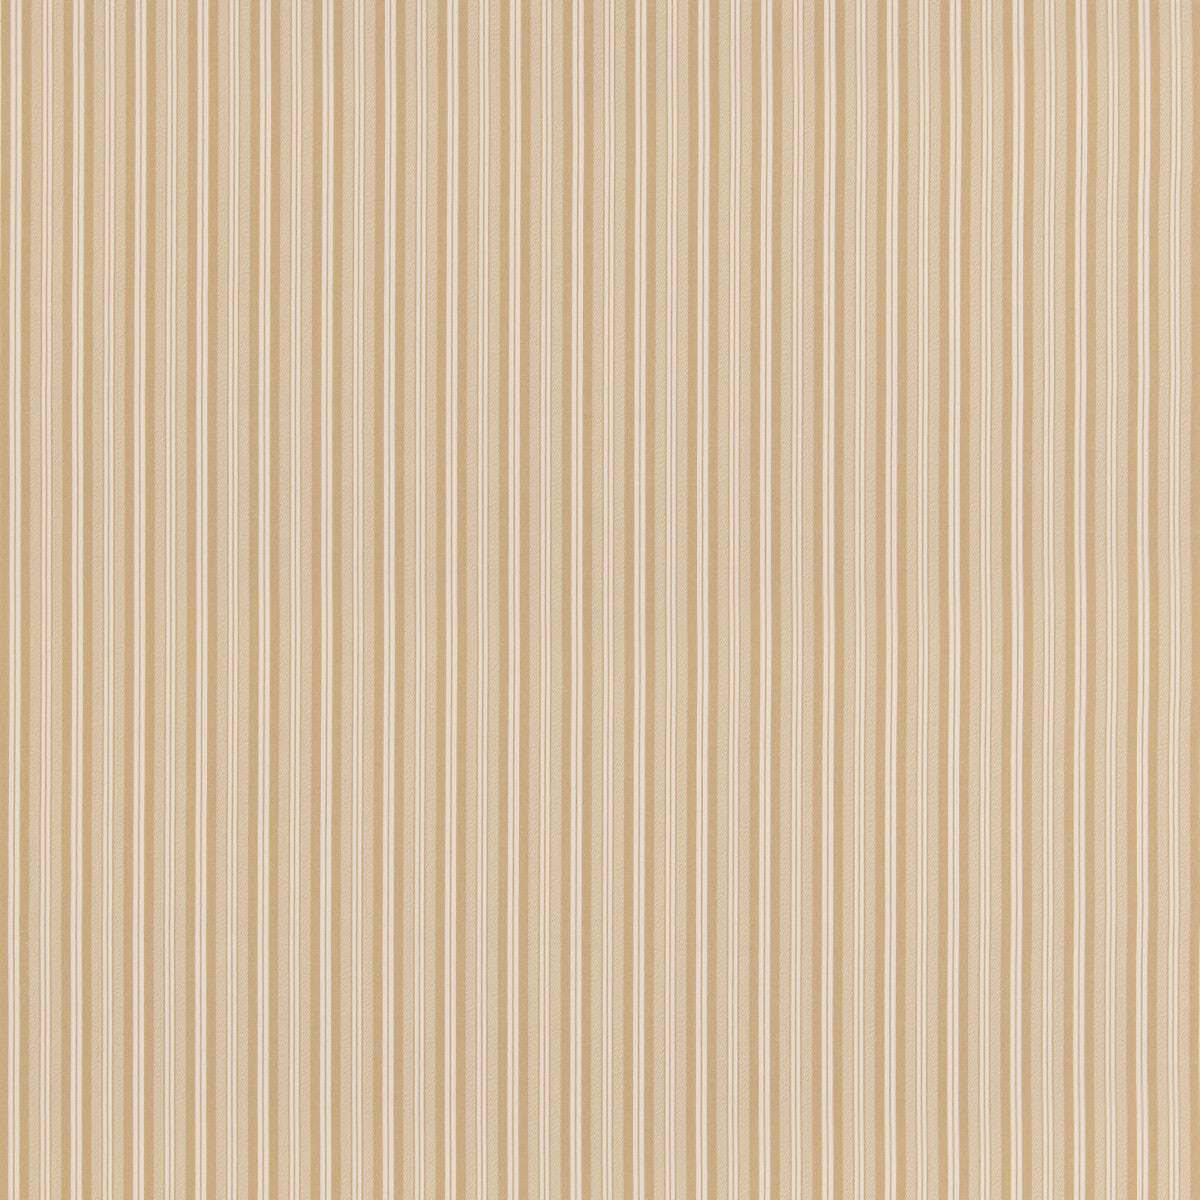 Laverton Stripe fabric in ochre color - pattern BF11037.840.0 - by G P &amp; J Baker in the Baker House Plain &amp; Stripe II collection